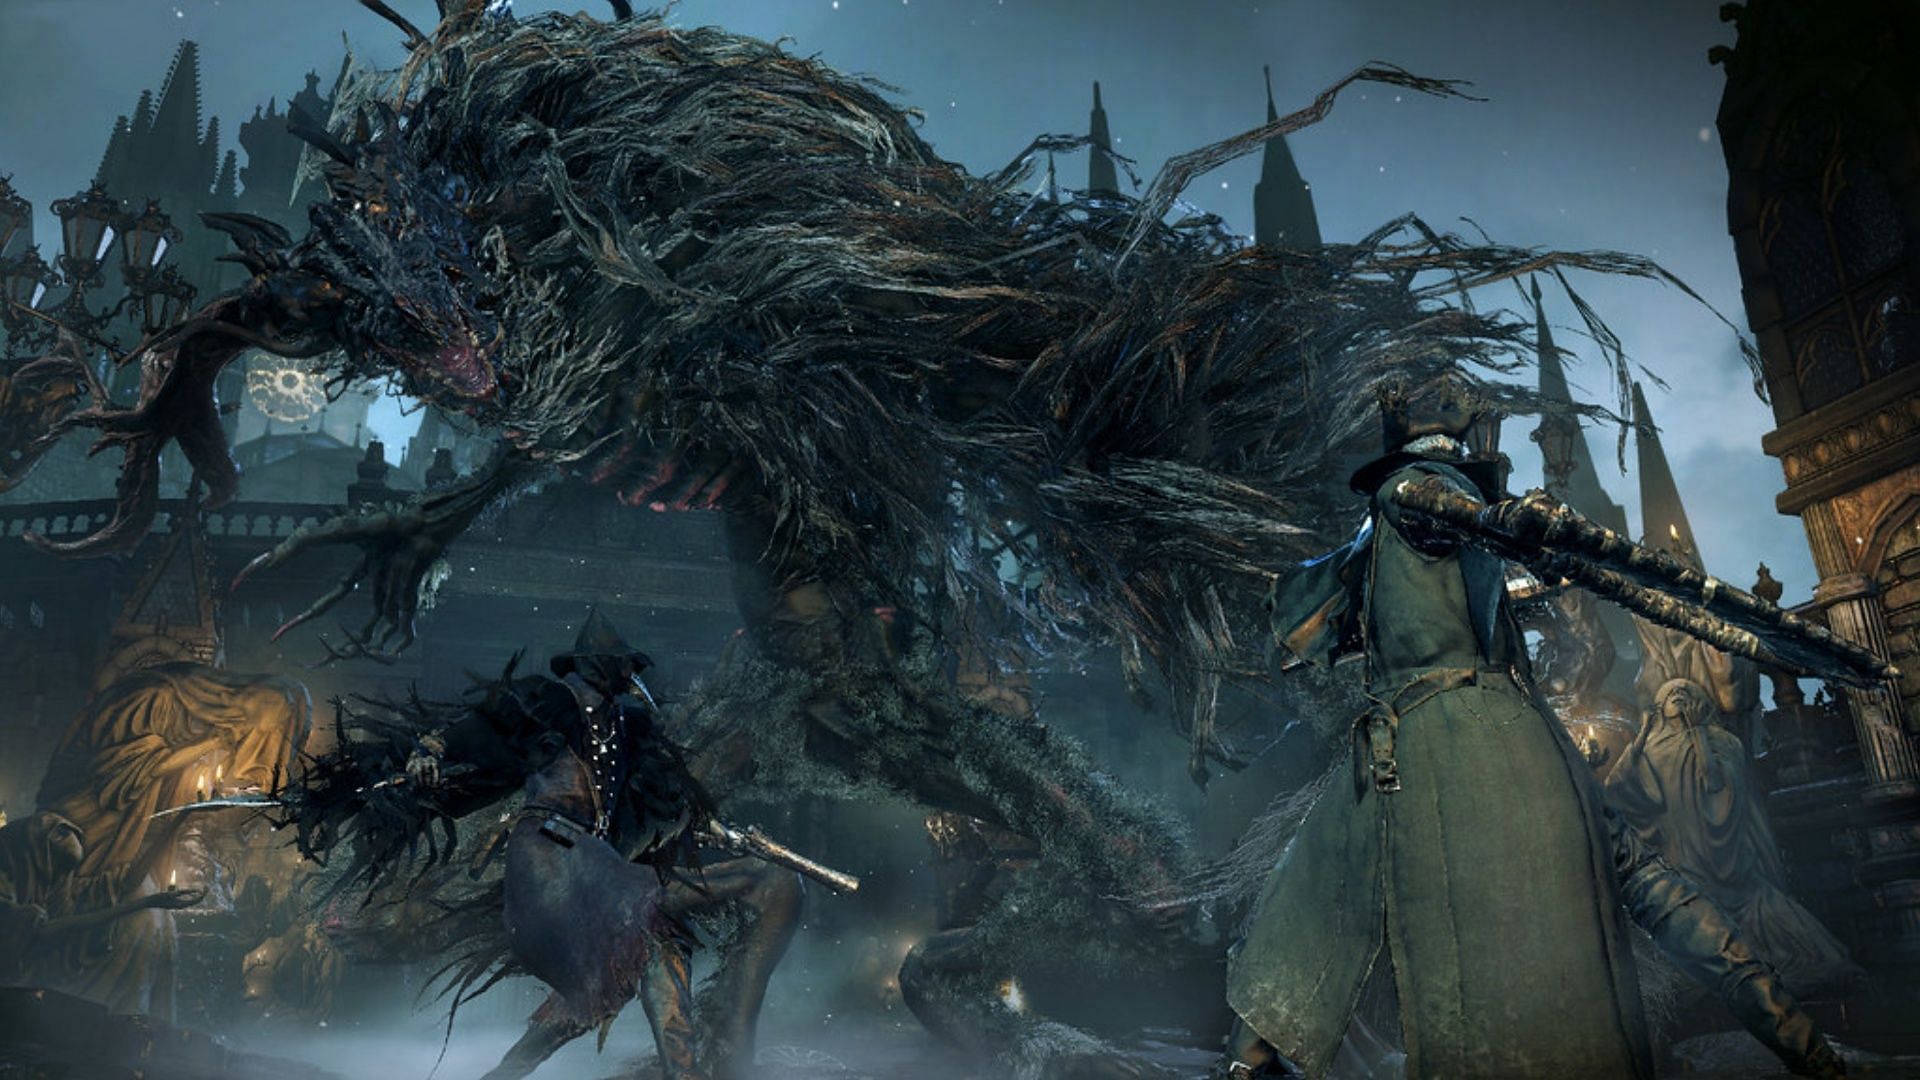 When is Bloodborne PC Port and PS5 Patch out? - The Leak